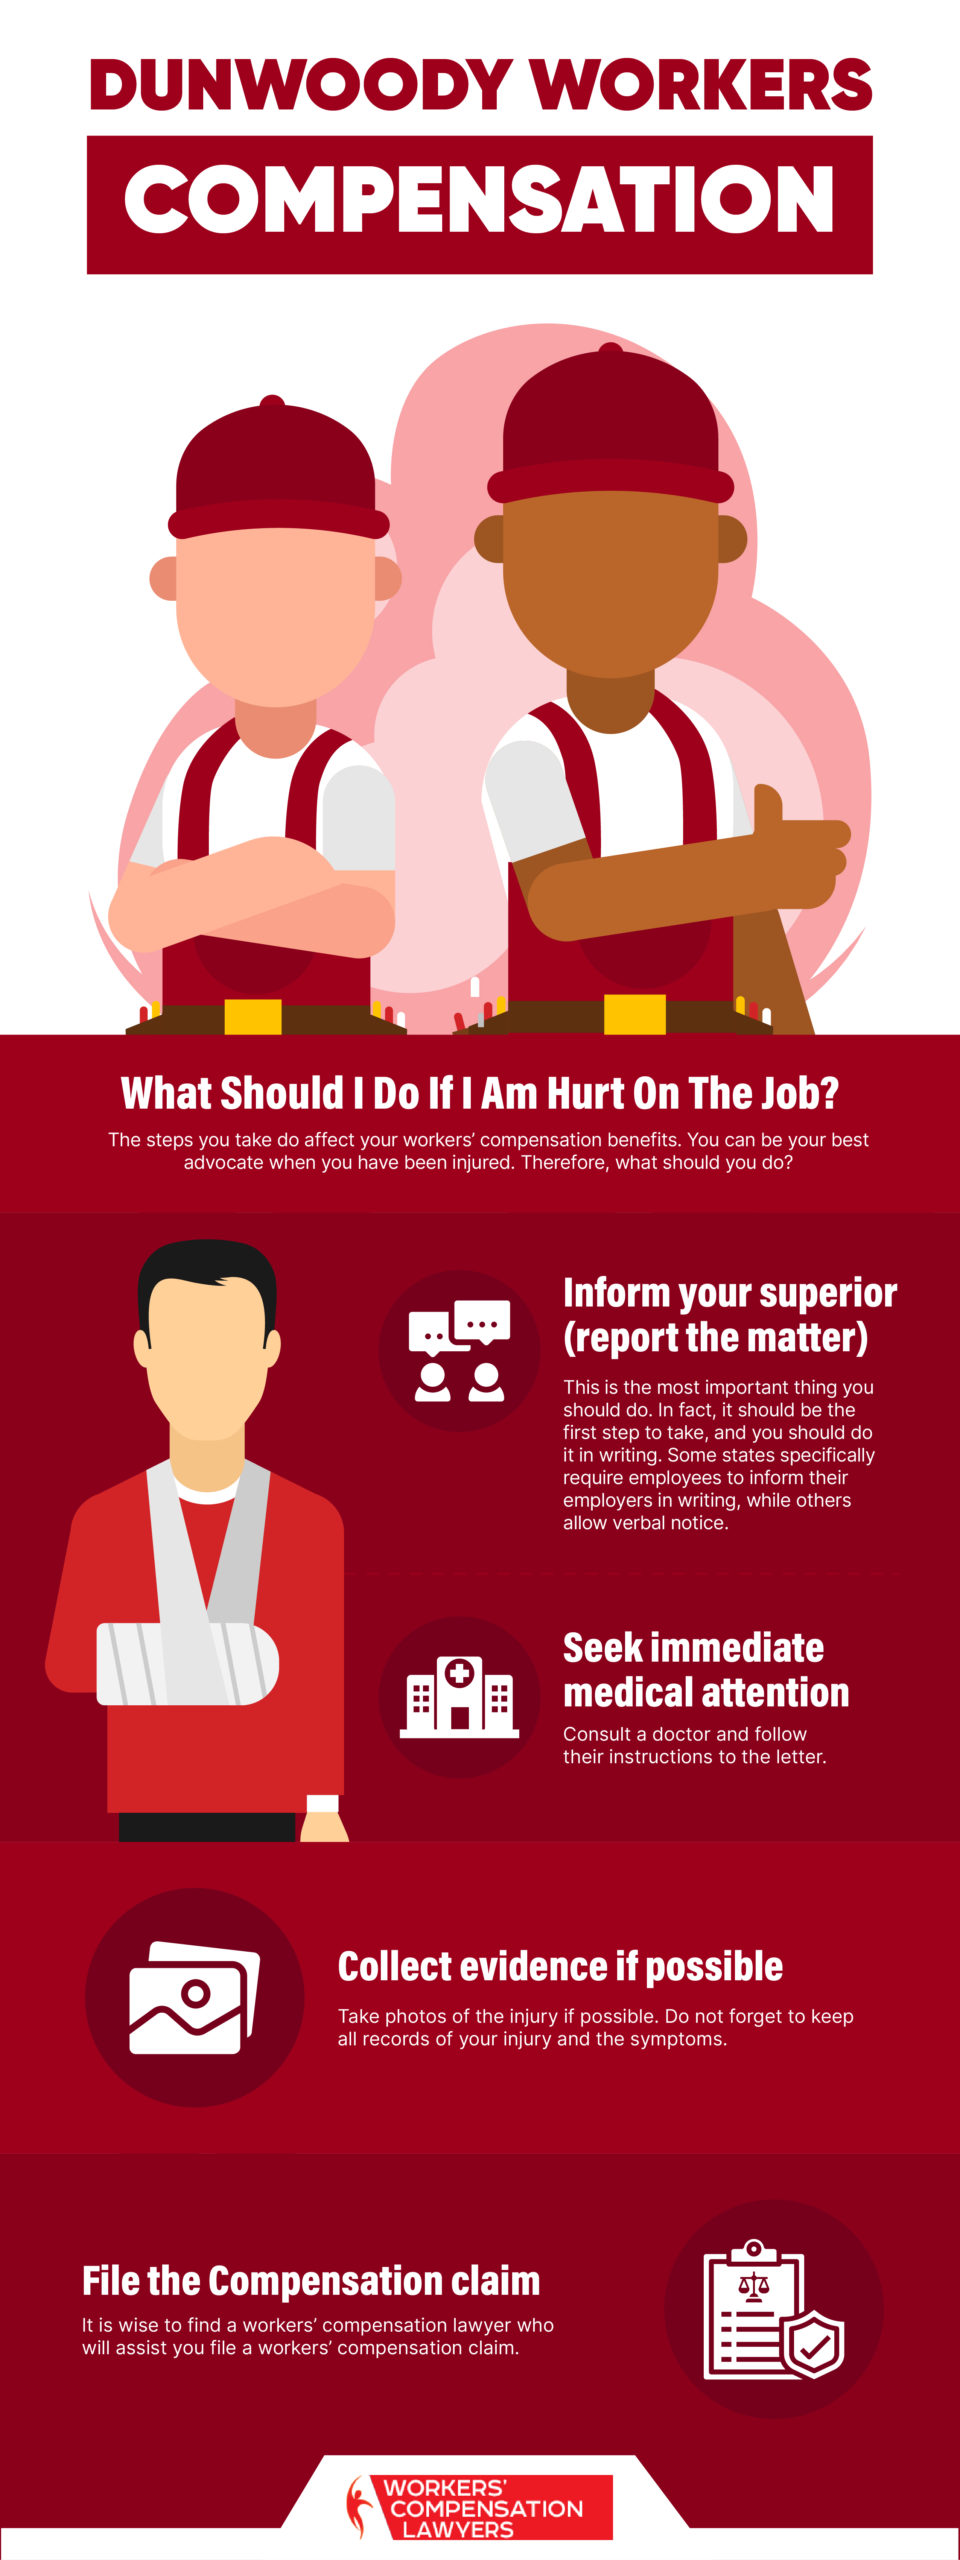 Dunwoody Workers Compensation Infographic